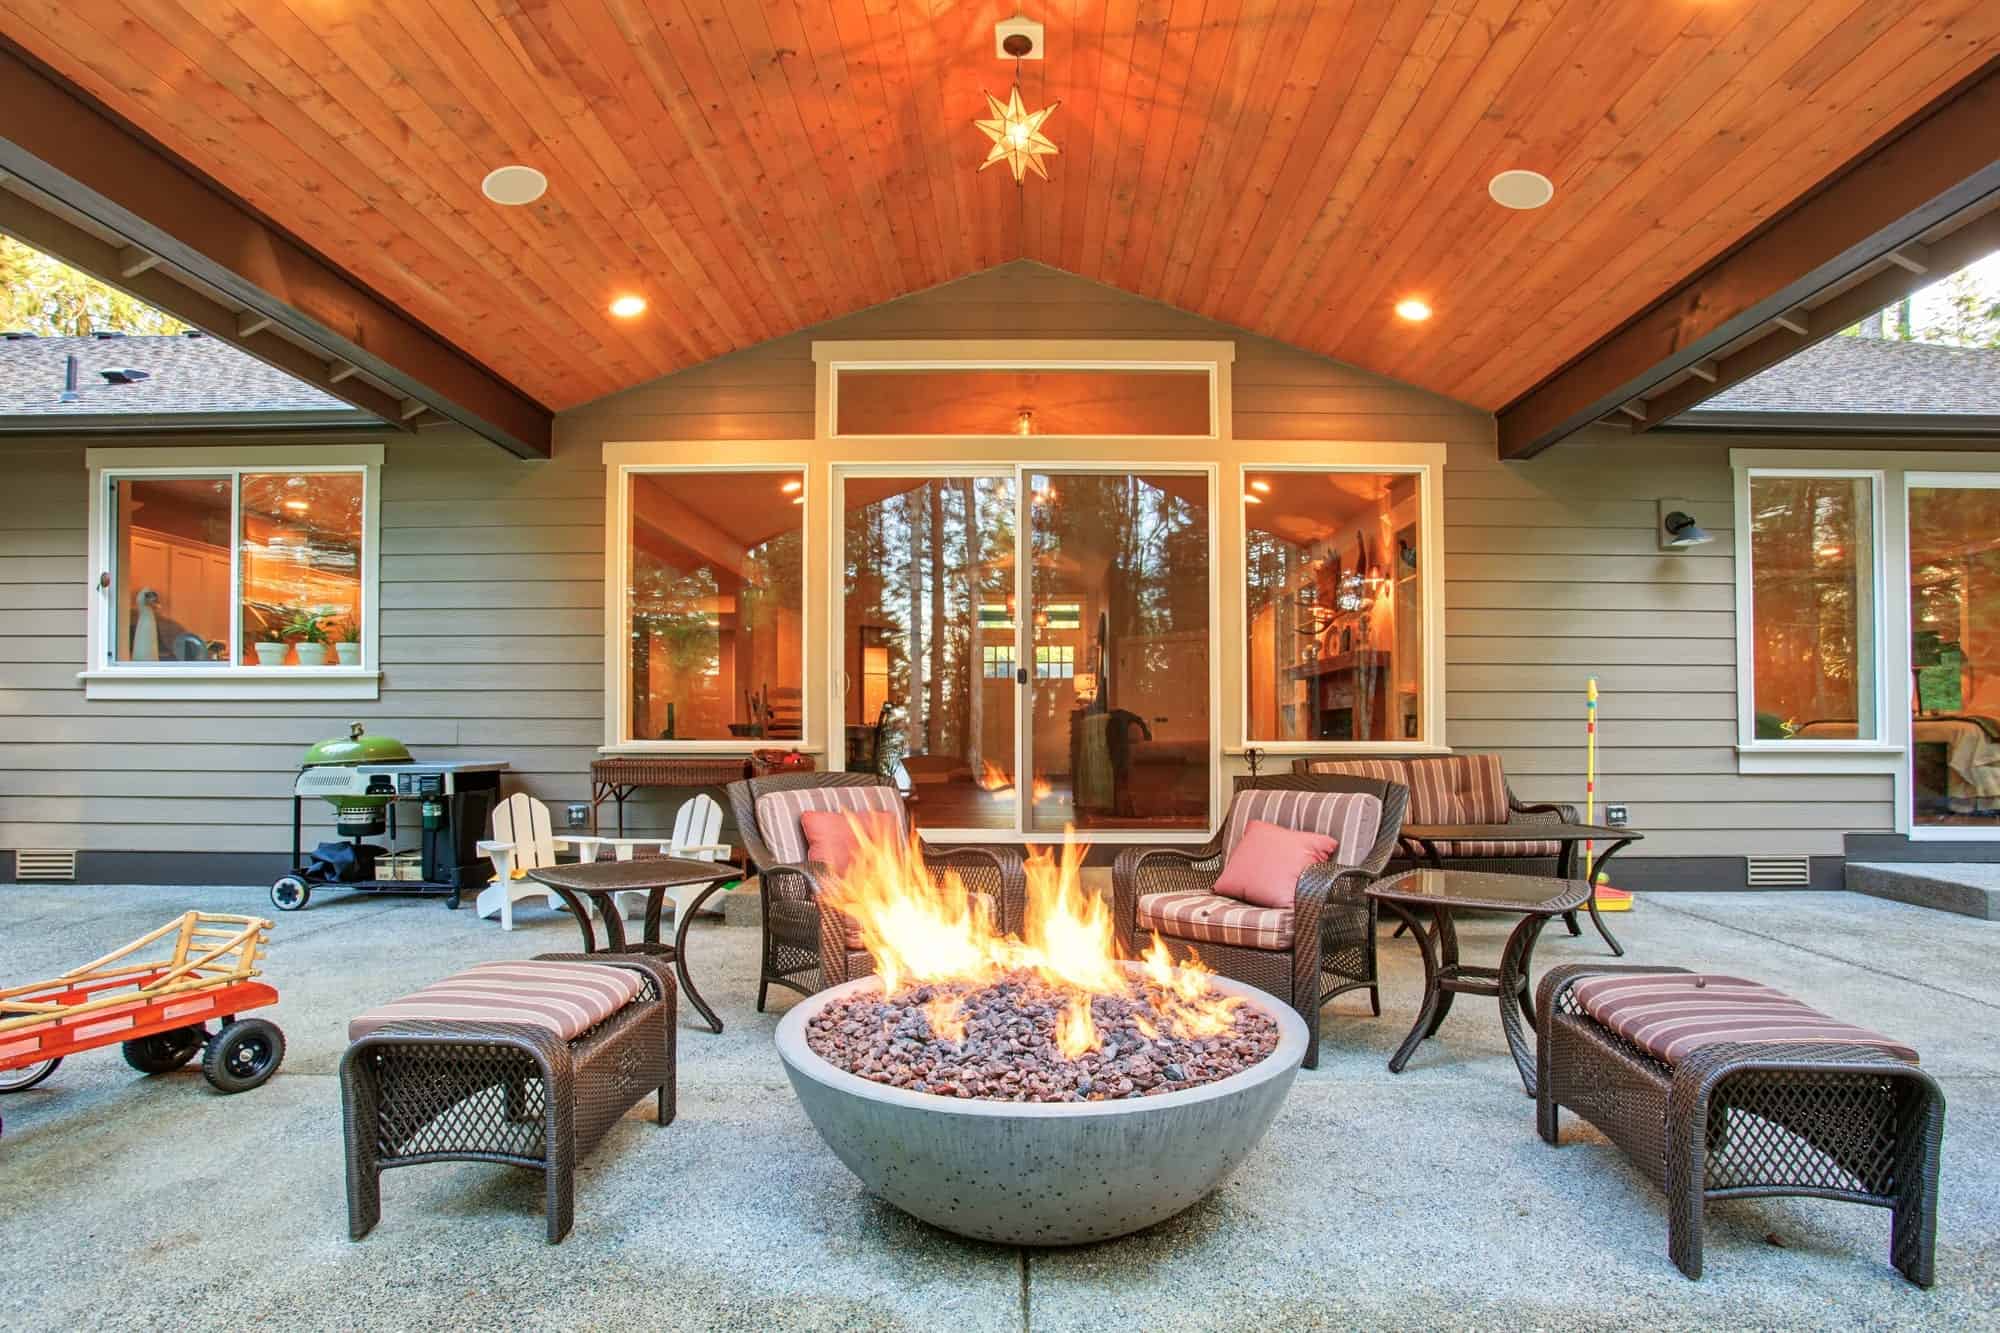 Gas powered fire pit set up outdoors